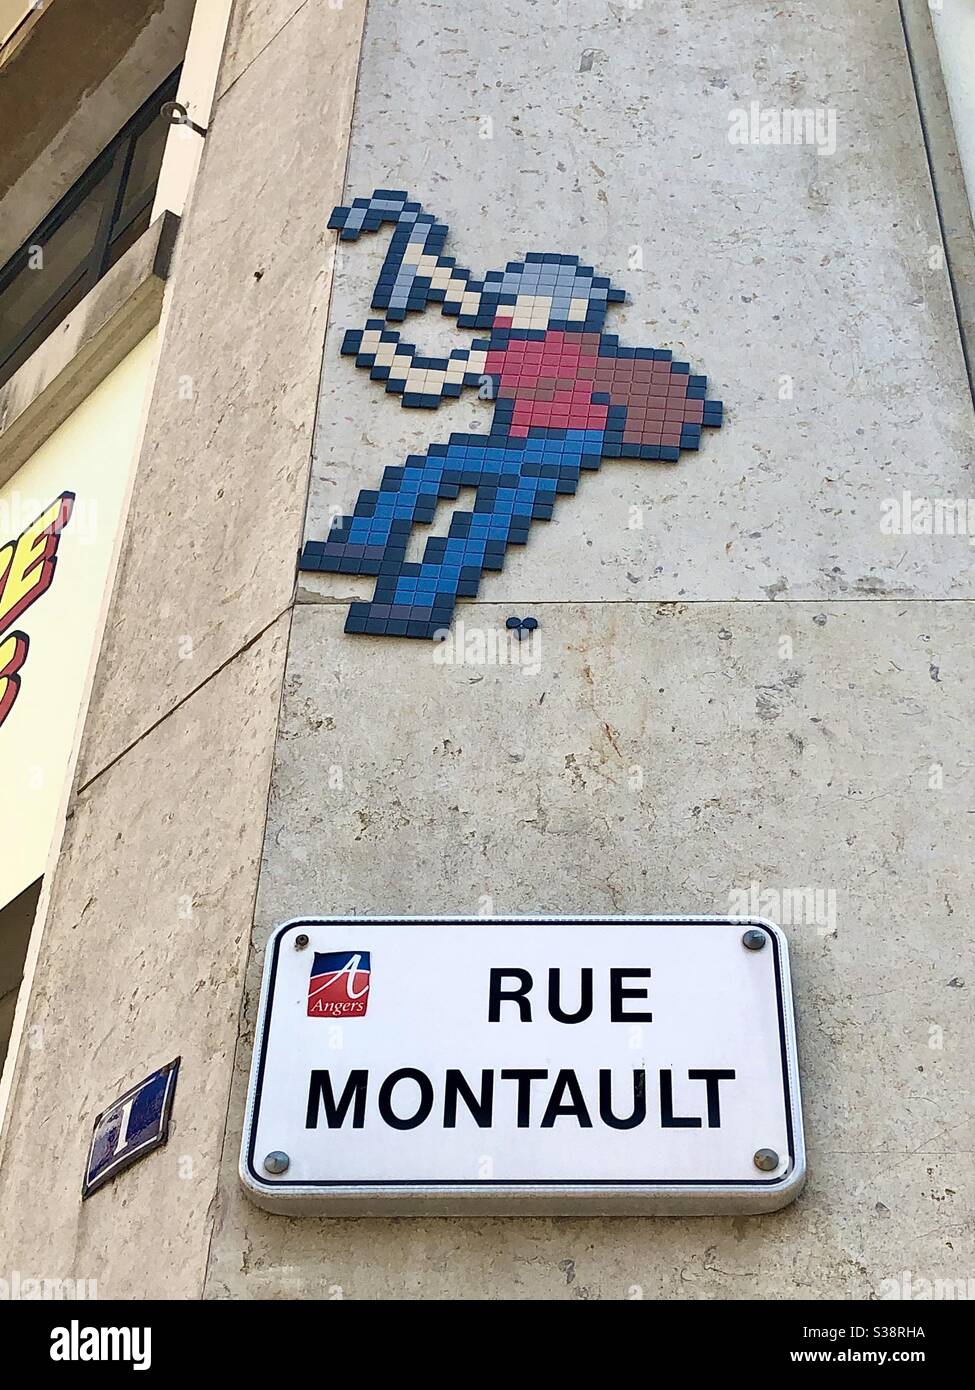 Ceramic tiles depiction of a rock climber - probably by « Invader » - above Rue Montault... derived from monter in French meaning ´to climb’. Stock Photo